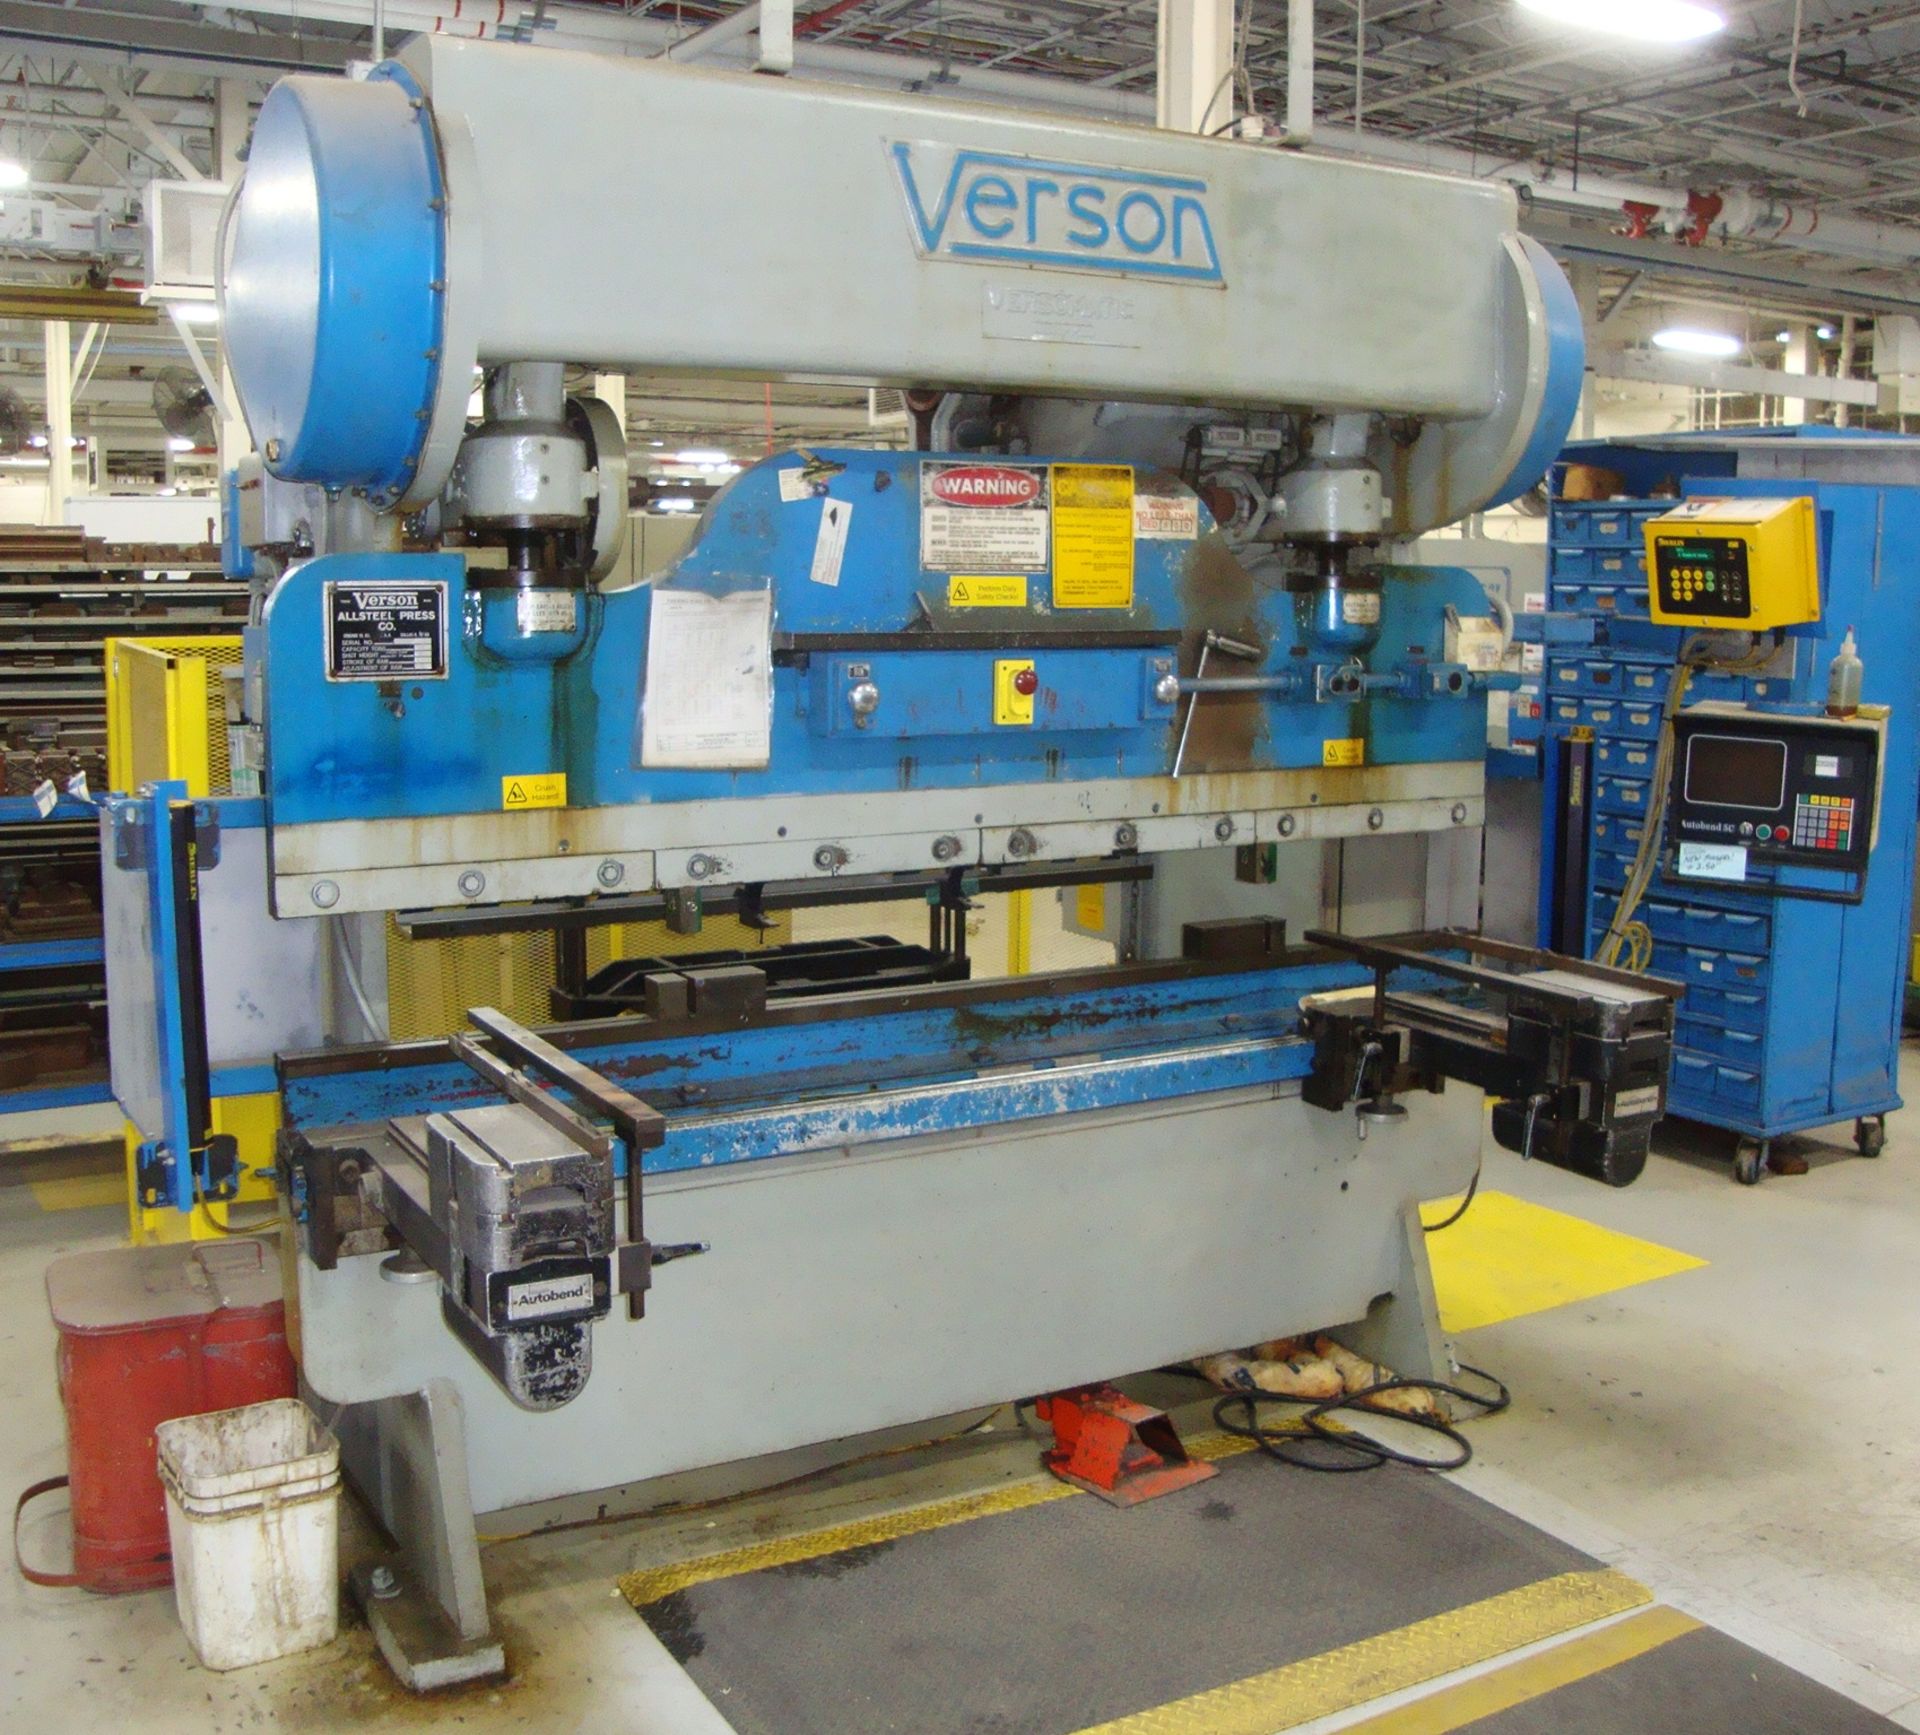 Verson 65 Ton 8' Press Versomatic w/Merlin Safety System, Serial # 22691-206.65, approx. 132" x